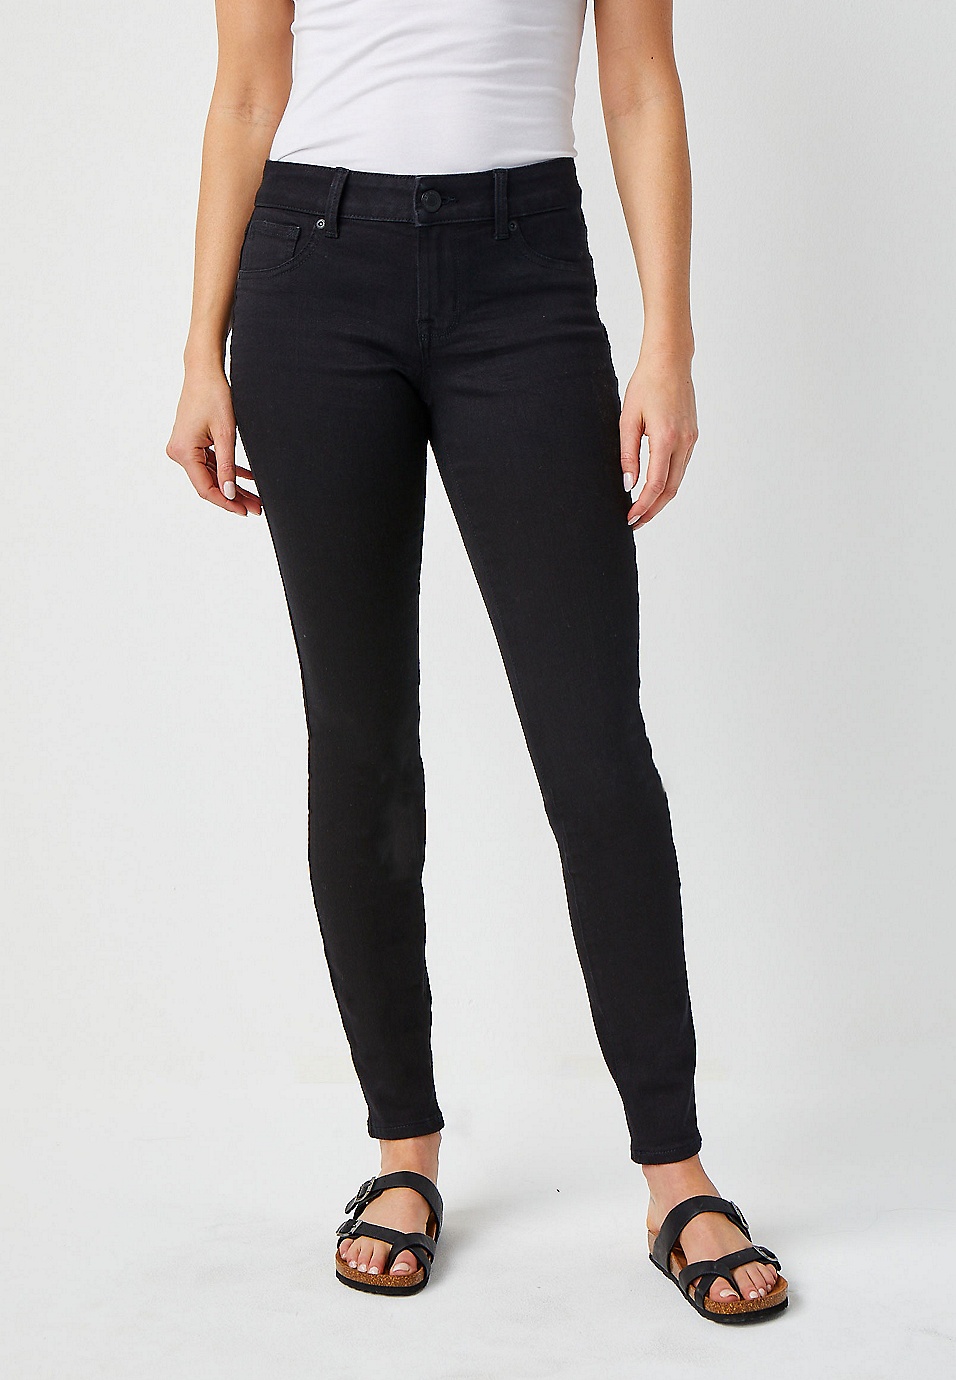 m jeans by maurices™ Black Mid Rise Jegging